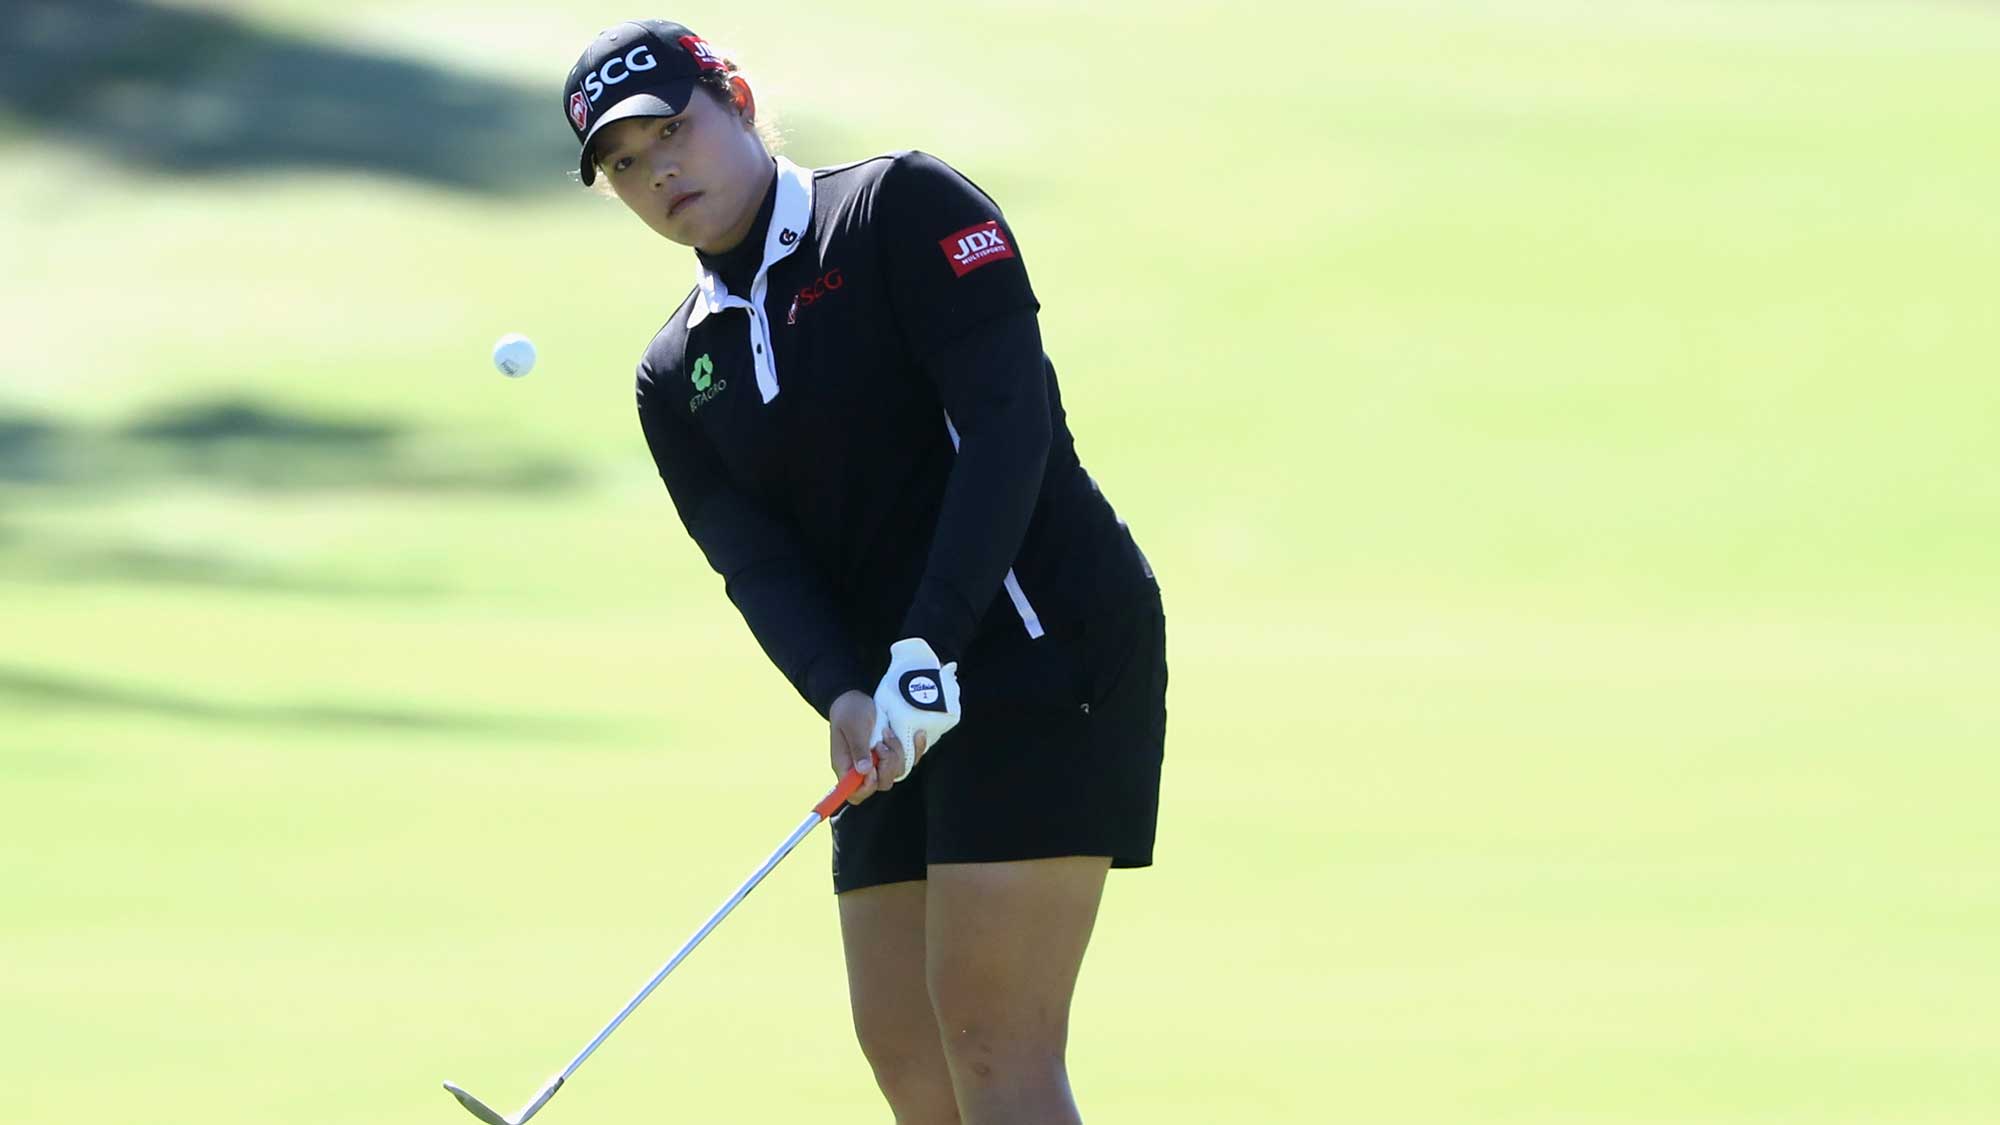 Ariya Jutanugarn of Thailand plays a shot on the second hole during the final round of the CME Group Tour Championship